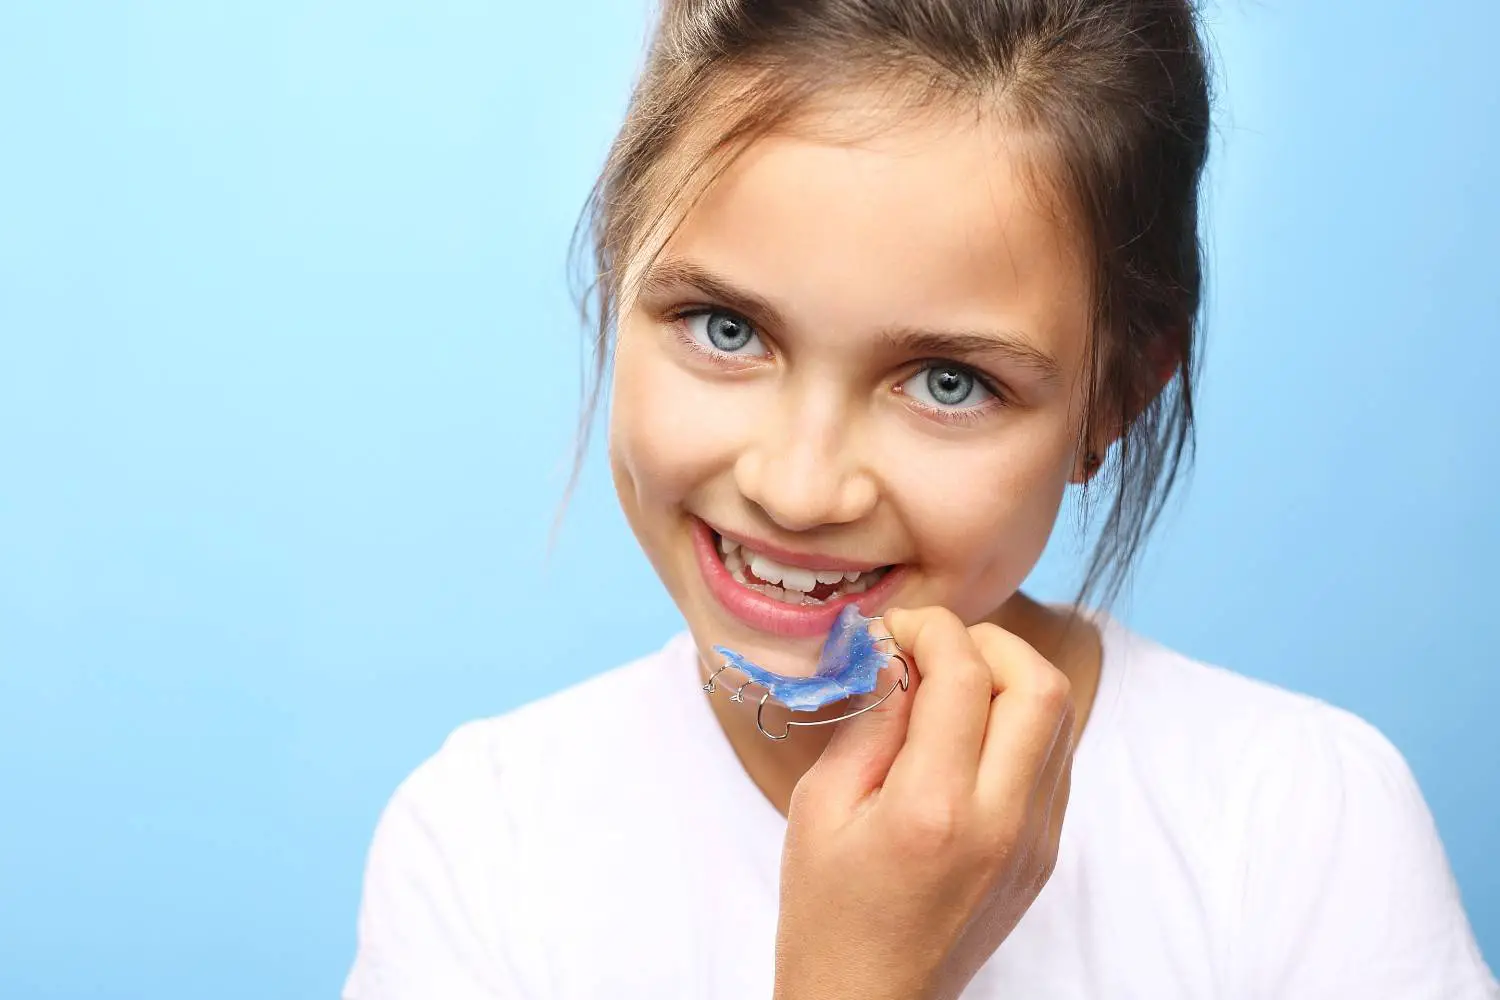 How to Clean Retainers: 7 Useful Tips You Should Not Miss